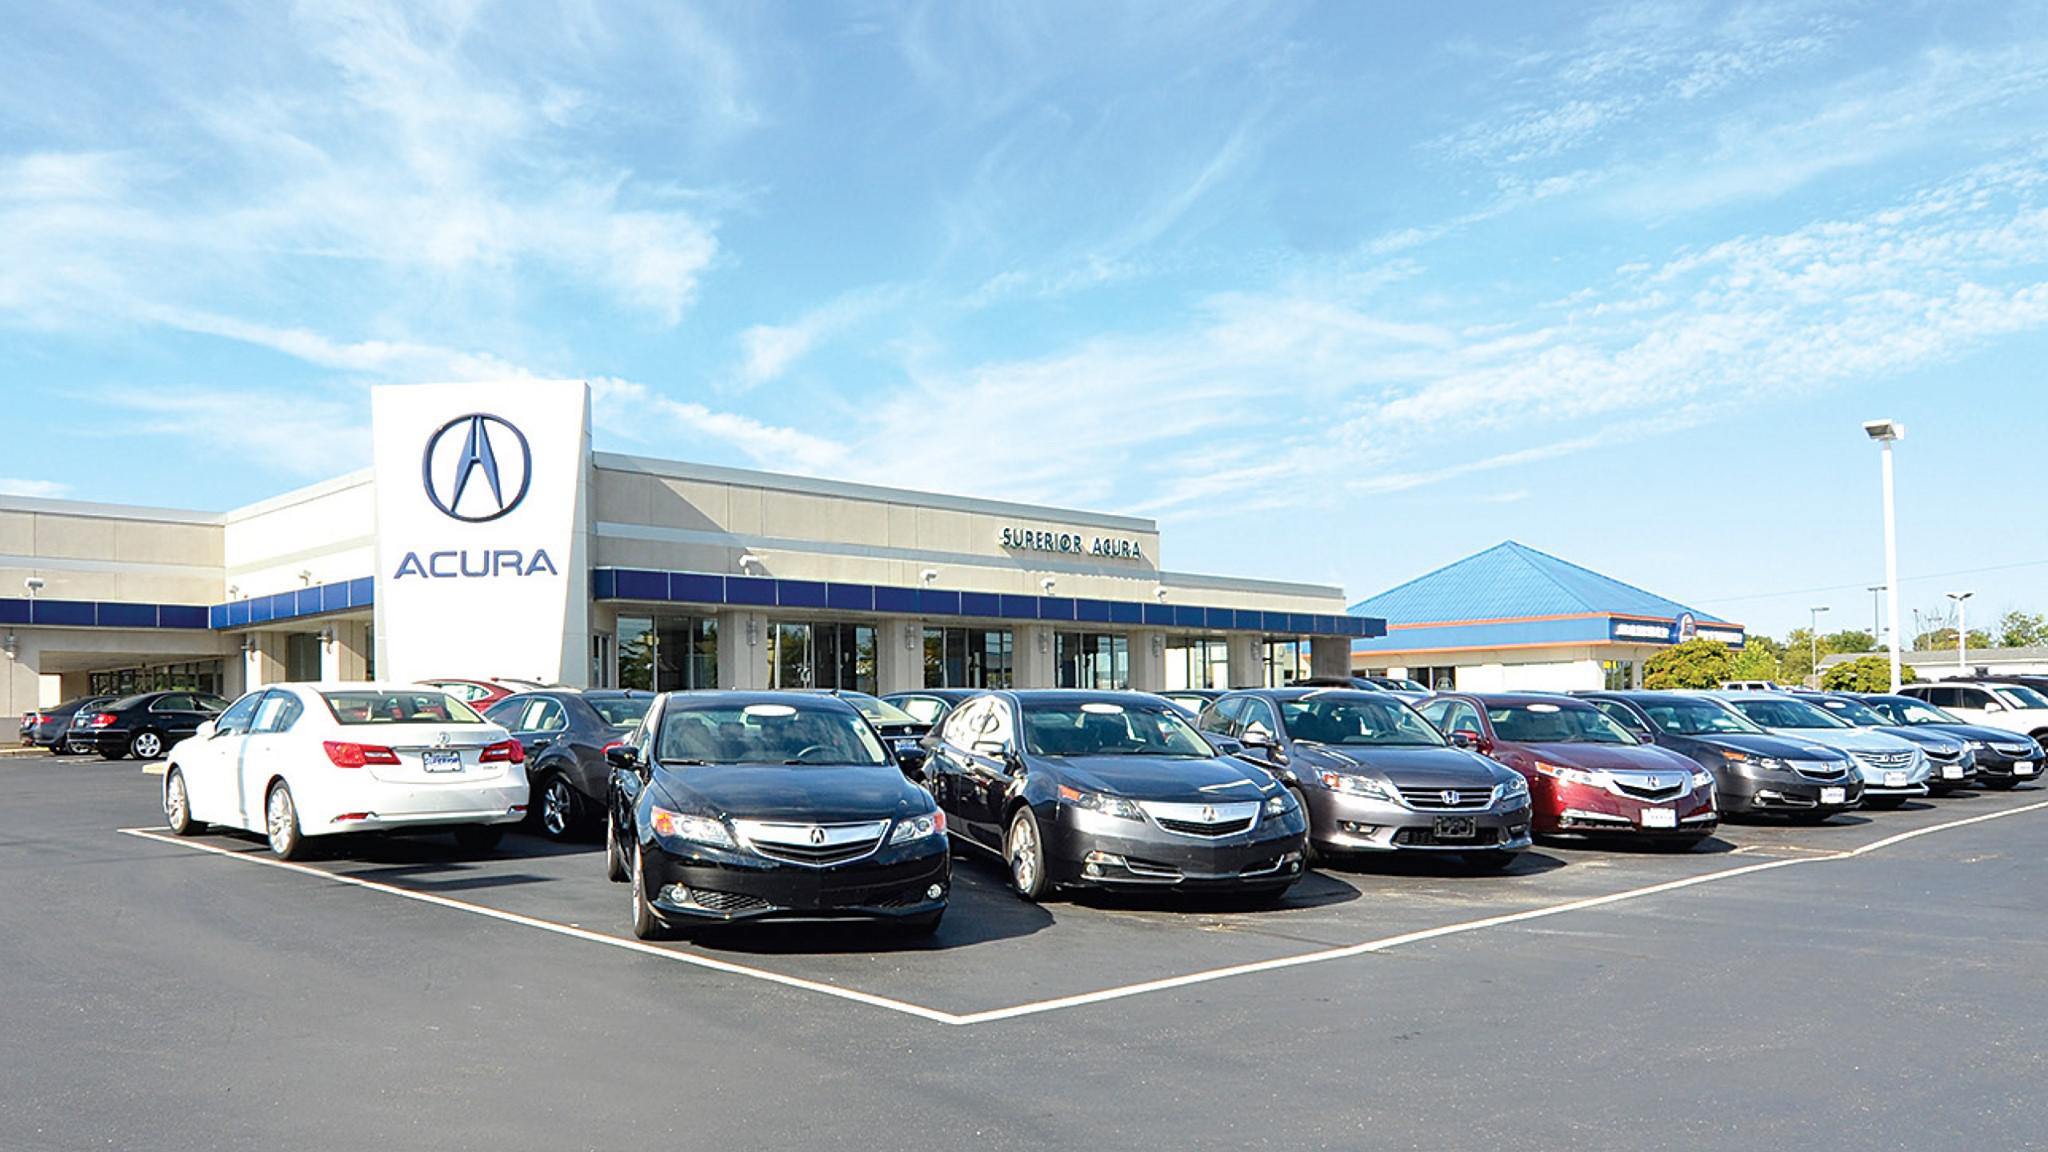 Jeff Wyler Acura of Fairfield - Precision Crafted Performance - visit: www.superioracurastore.com or call 513-829-8500